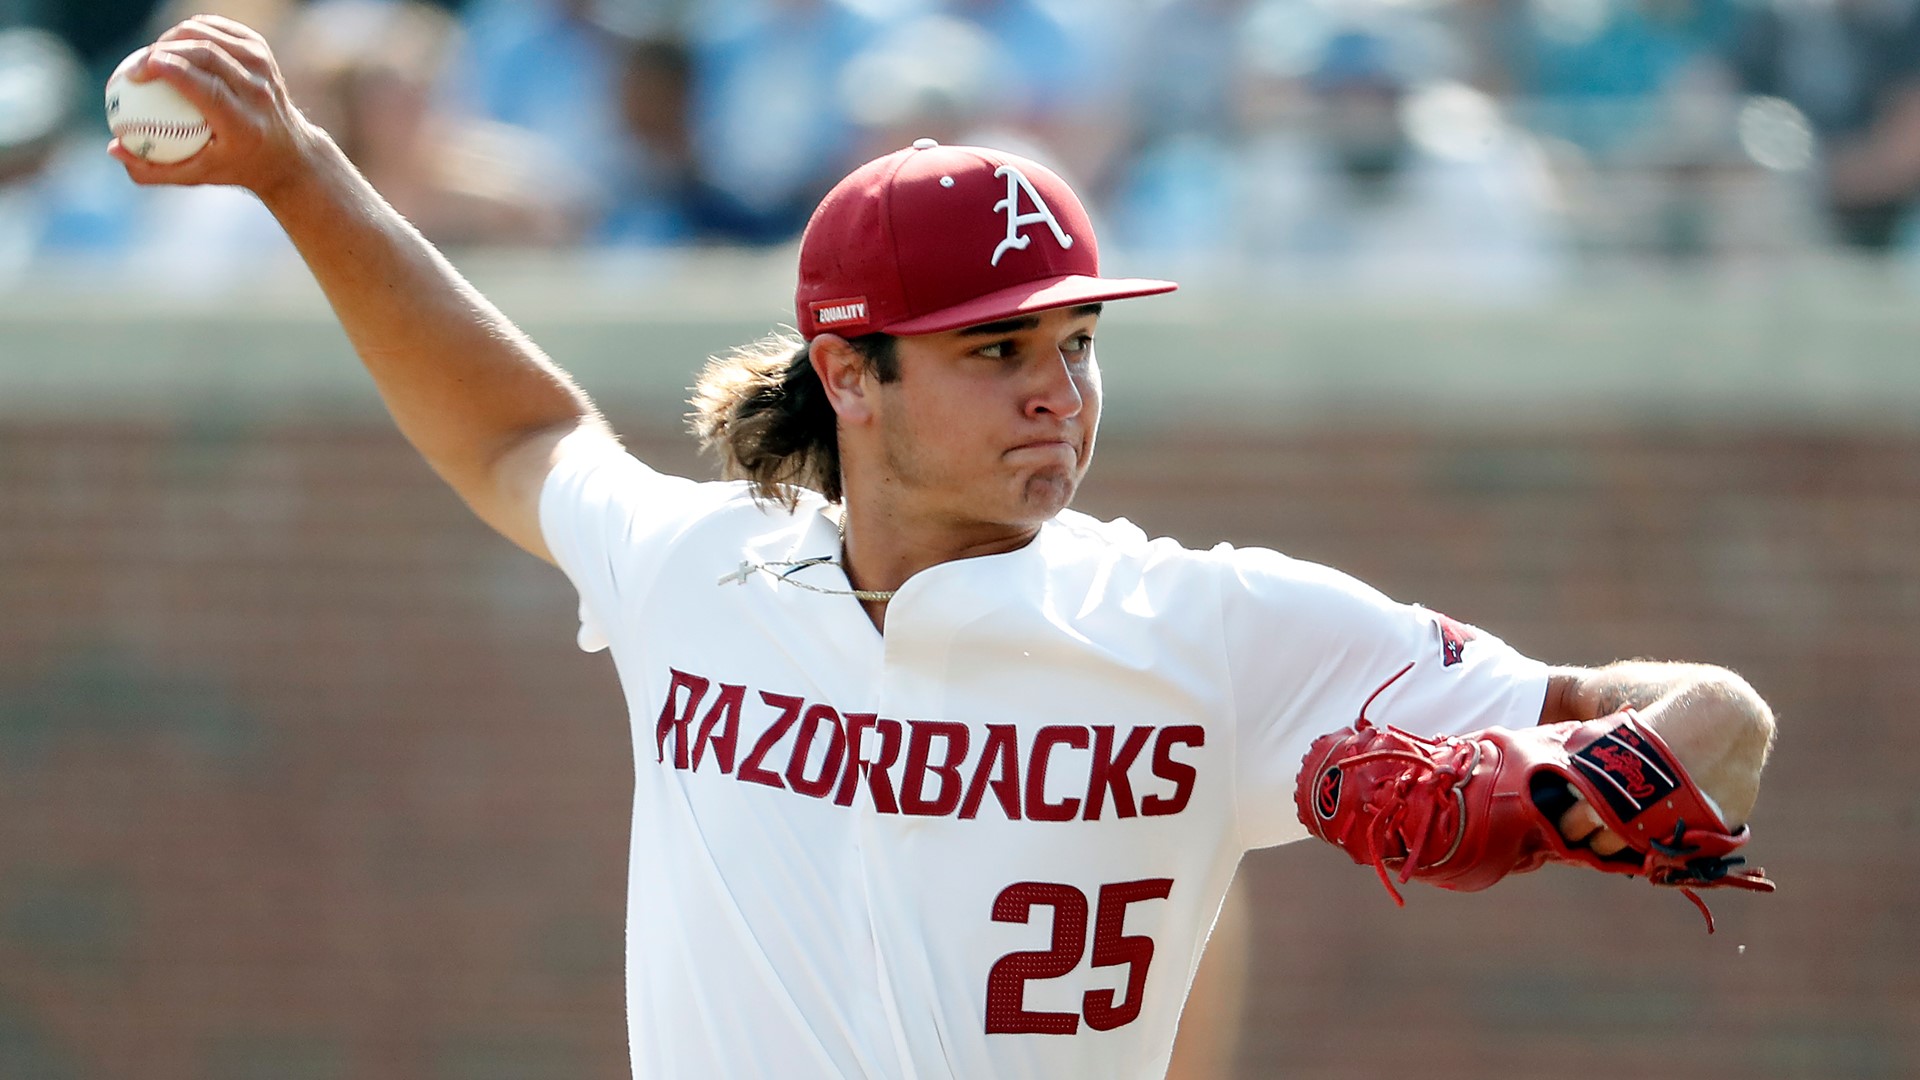 Tygart first experienced the College World Series from the stands as a 13-year old. Six years later, he returns as a player with the Razorbacks.